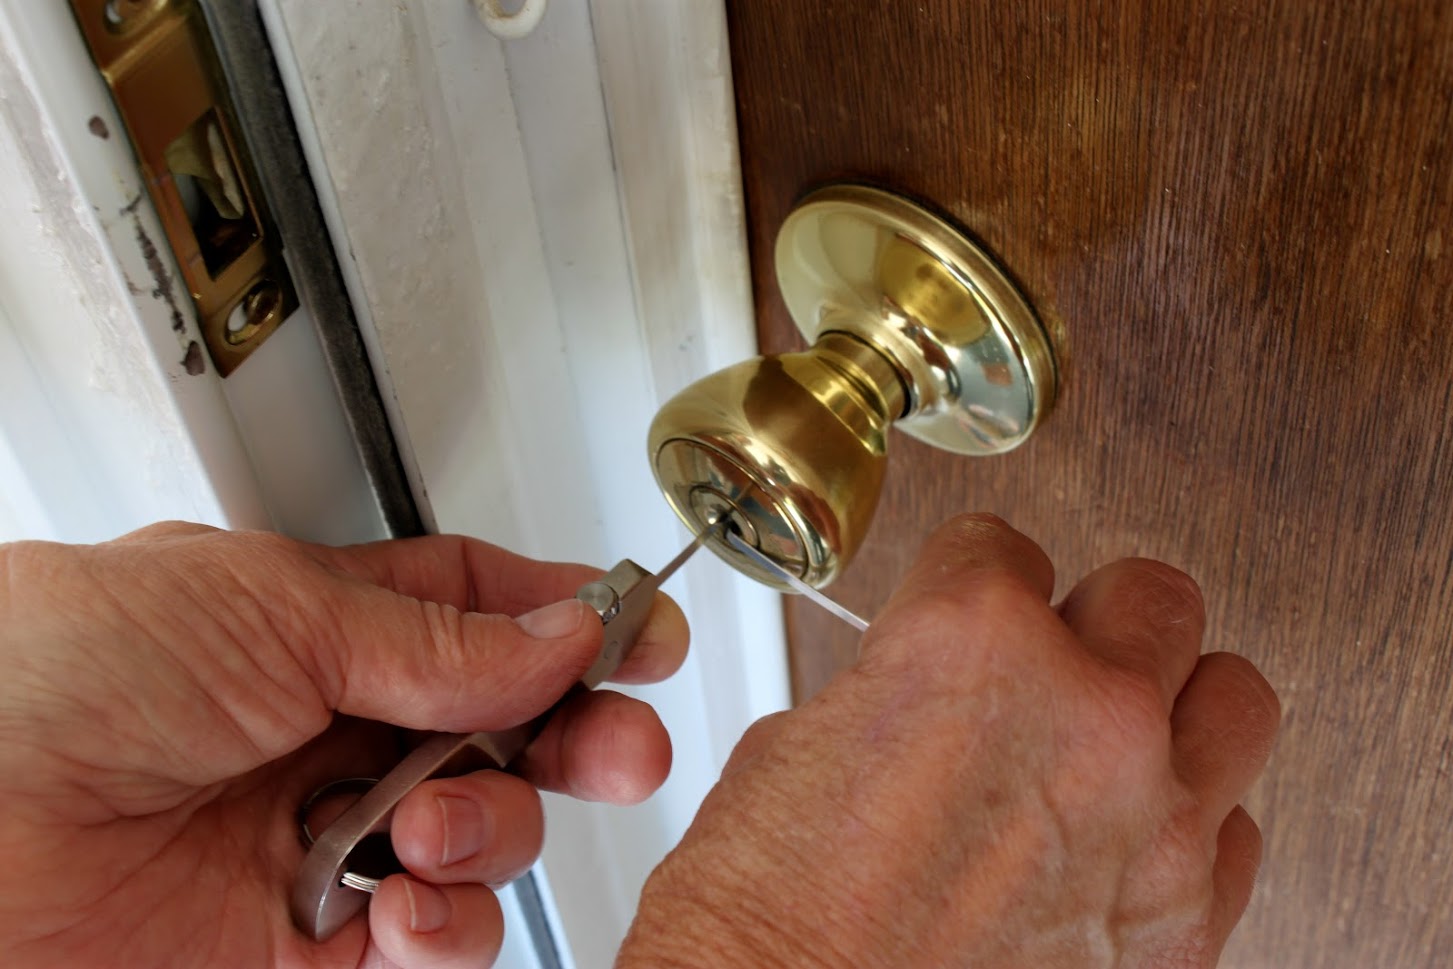 How To Pick A Lock On A House Door